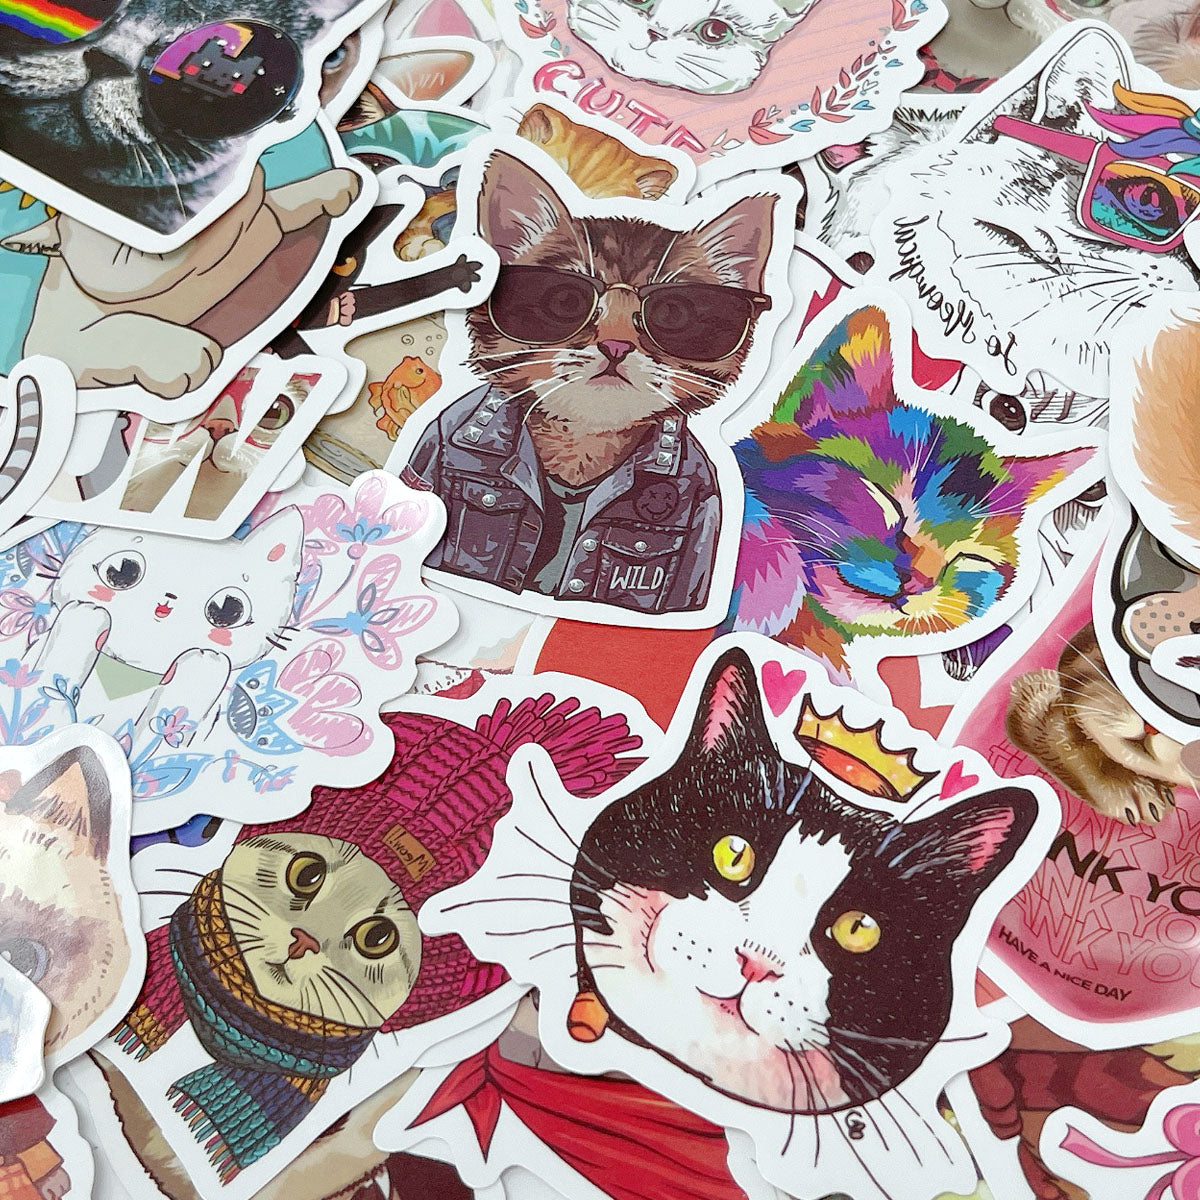 100pcs Cute Cat Stickers for Water Bottle Kitten Kitty Stickers Decals Cat Gifts for Adults Teens Kids Cat Items Decor